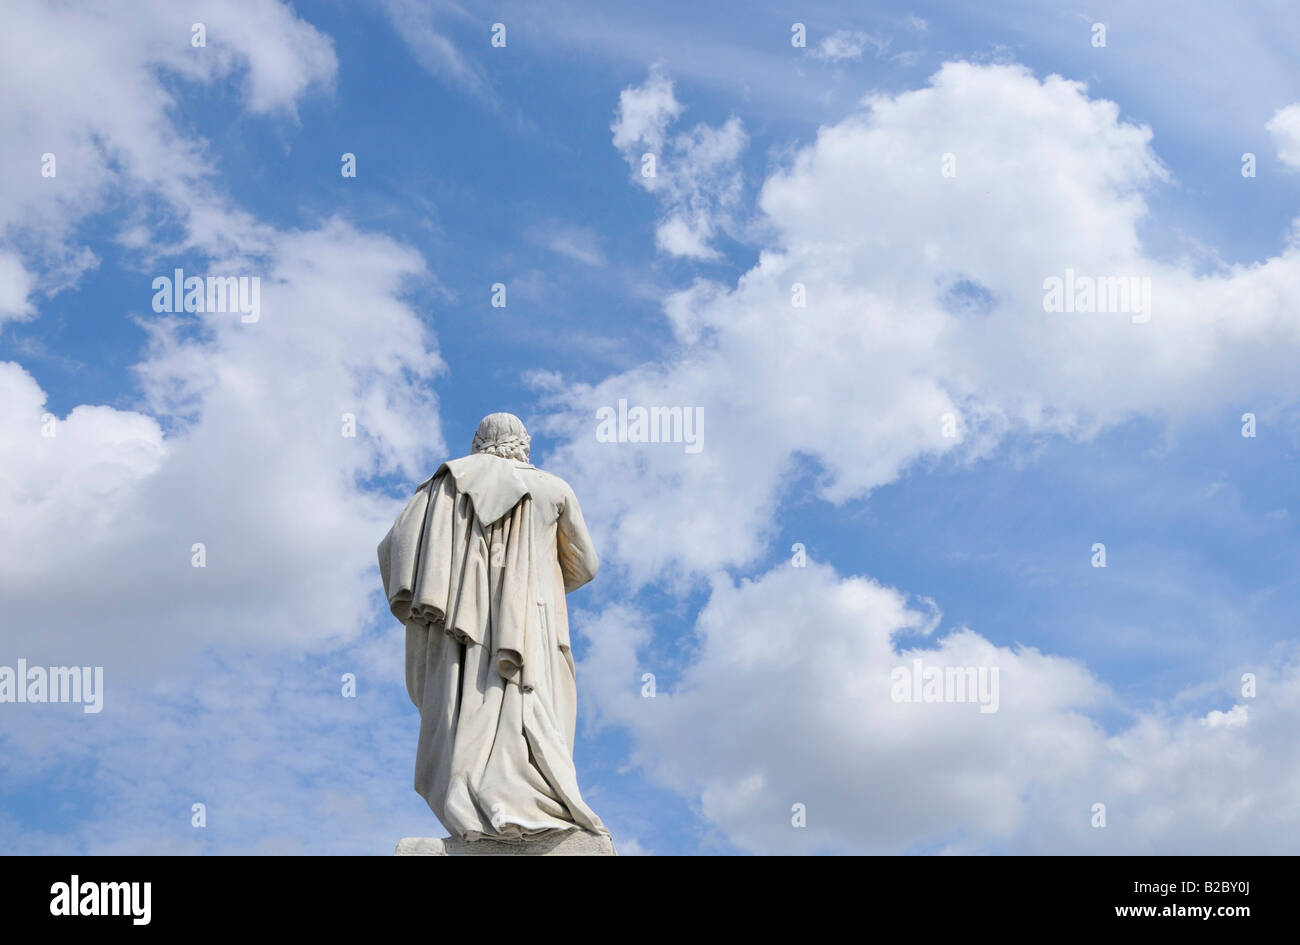 Rear view of the Schiller Monument on Gendarmenmarkt in front of a blue sky with white clouds, Berlin, Germany, Europe Stock Photo